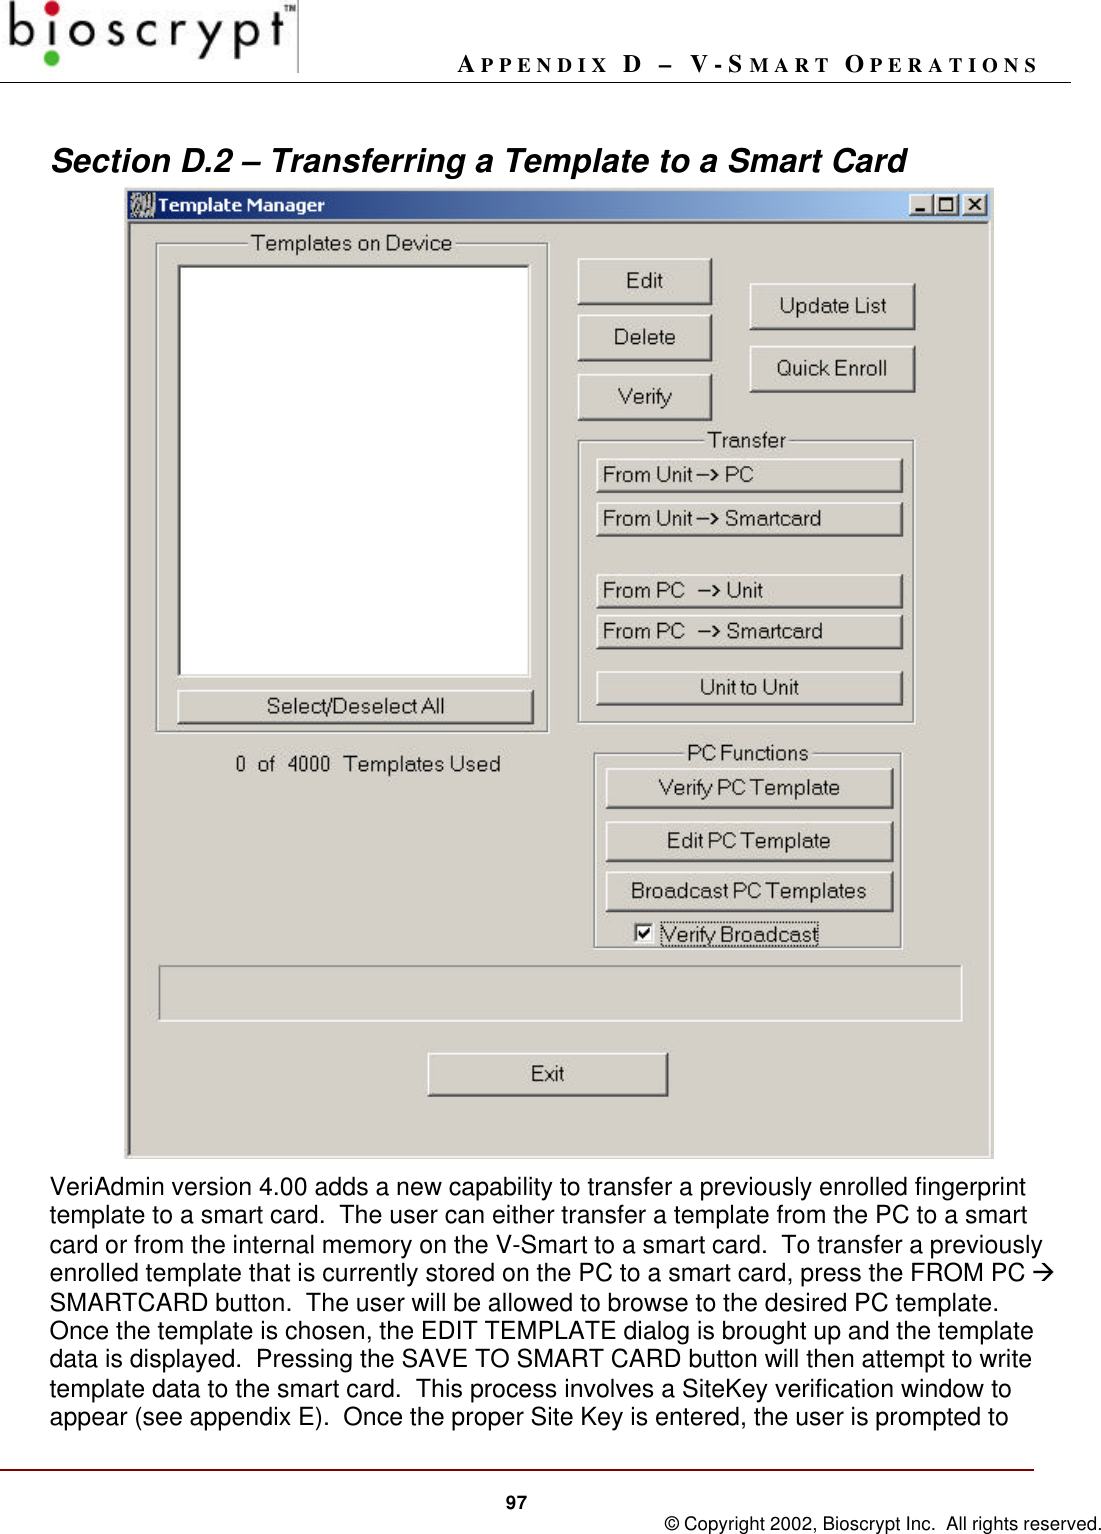 APPENDIX D – V-SMART OPERATIONS97 © Copyright 2002, Bioscrypt Inc.  All rights reserved.Section D.2 – Transferring a Template to a Smart CardVeriAdmin version 4.00 adds a new capability to transfer a previously enrolled fingerprinttemplate to a smart card.  The user can either transfer a template from the PC to a smartcard or from the internal memory on the V-Smart to a smart card.  To transfer a previouslyenrolled template that is currently stored on the PC to a smart card, press the FROM PC àSMARTCARD button.  The user will be allowed to browse to the desired PC template.Once the template is chosen, the EDIT TEMPLATE dialog is brought up and the templatedata is displayed.  Pressing the SAVE TO SMART CARD button will then attempt to writetemplate data to the smart card.  This process involves a SiteKey verification window toappear (see appendix E).  Once the proper Site Key is entered, the user is prompted to